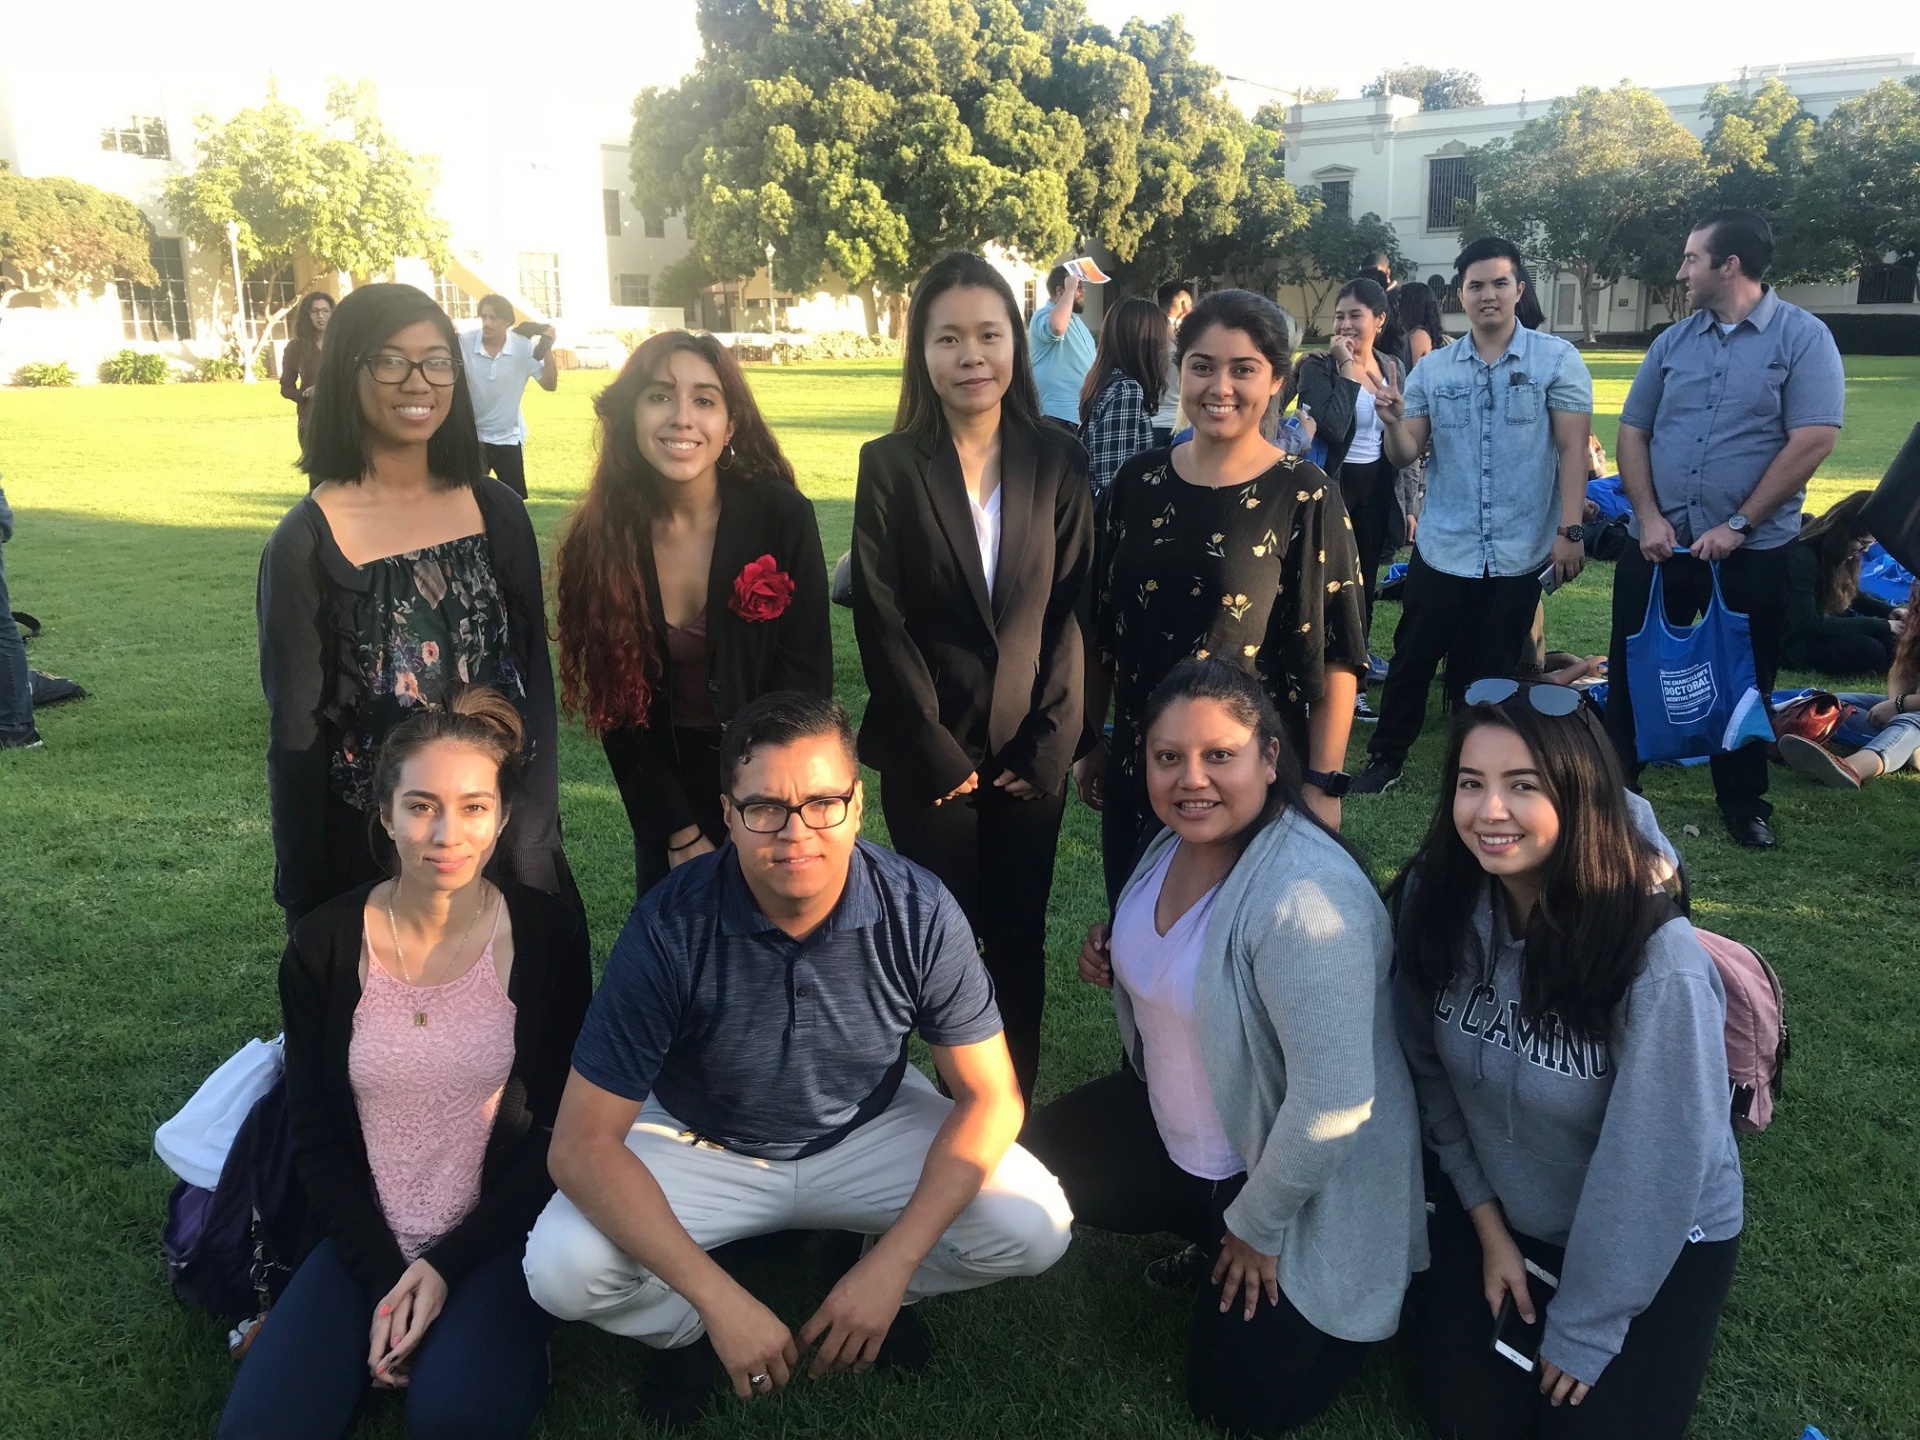 1. Students at Diveristy Forum in San Diego 2018